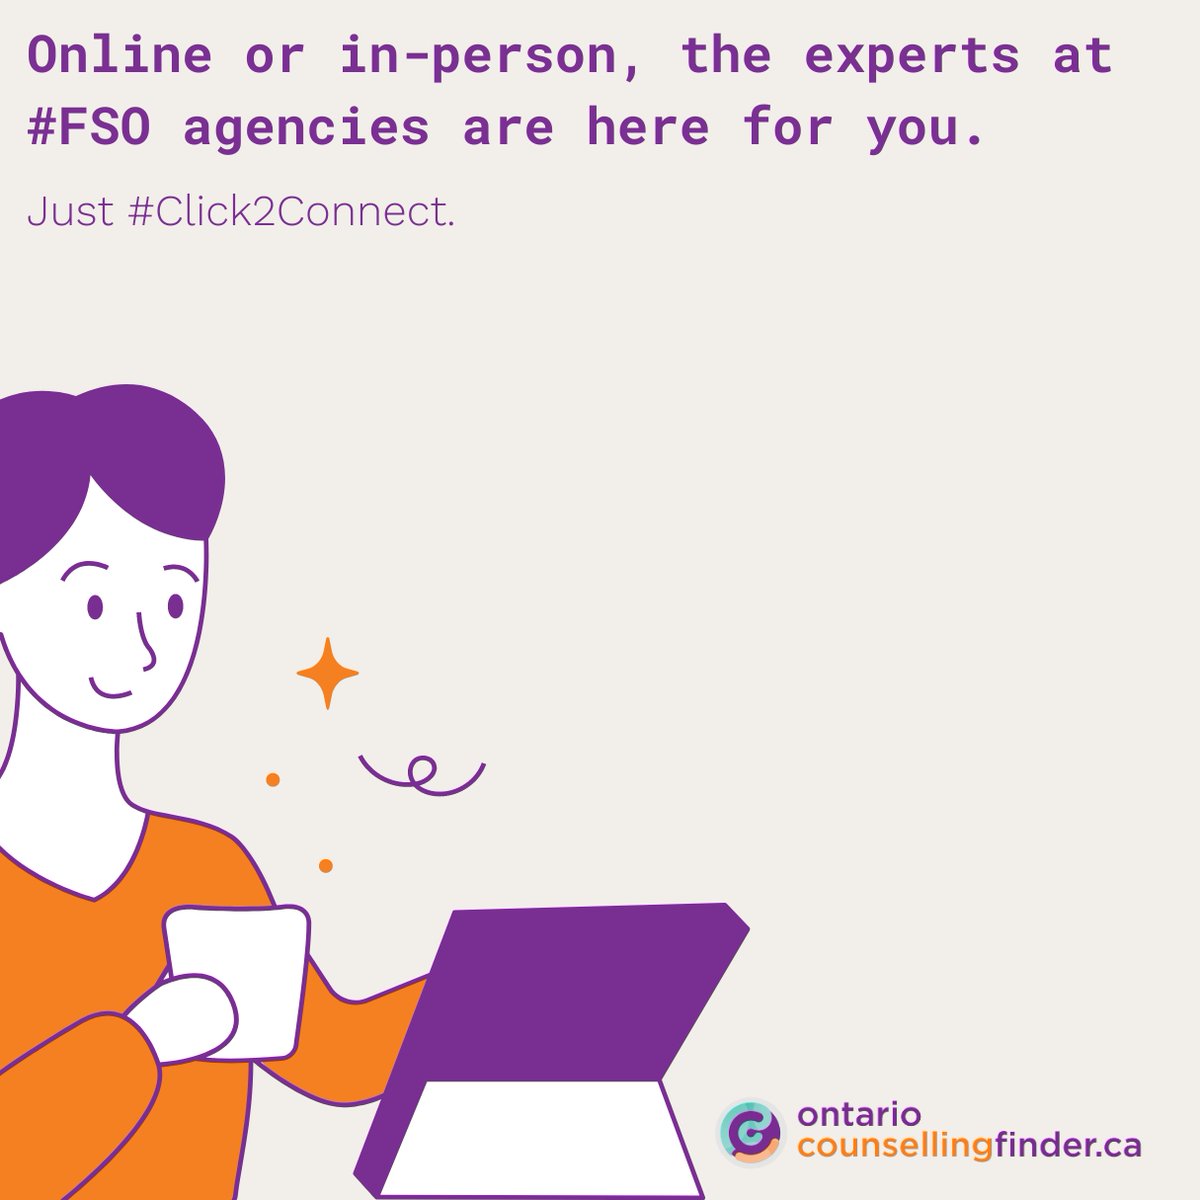 We know some people still prefer remote communication, and that works for us too! #Click2Connect to a counsellor today. ontariocounsellingfinder.ca #StrongerTogether #RelationshipExperts #KnowWhereToGo #FSO

@MichaelTibollo @MichaelParsa @211Ontario @AutismONT @ONgov @Caredove